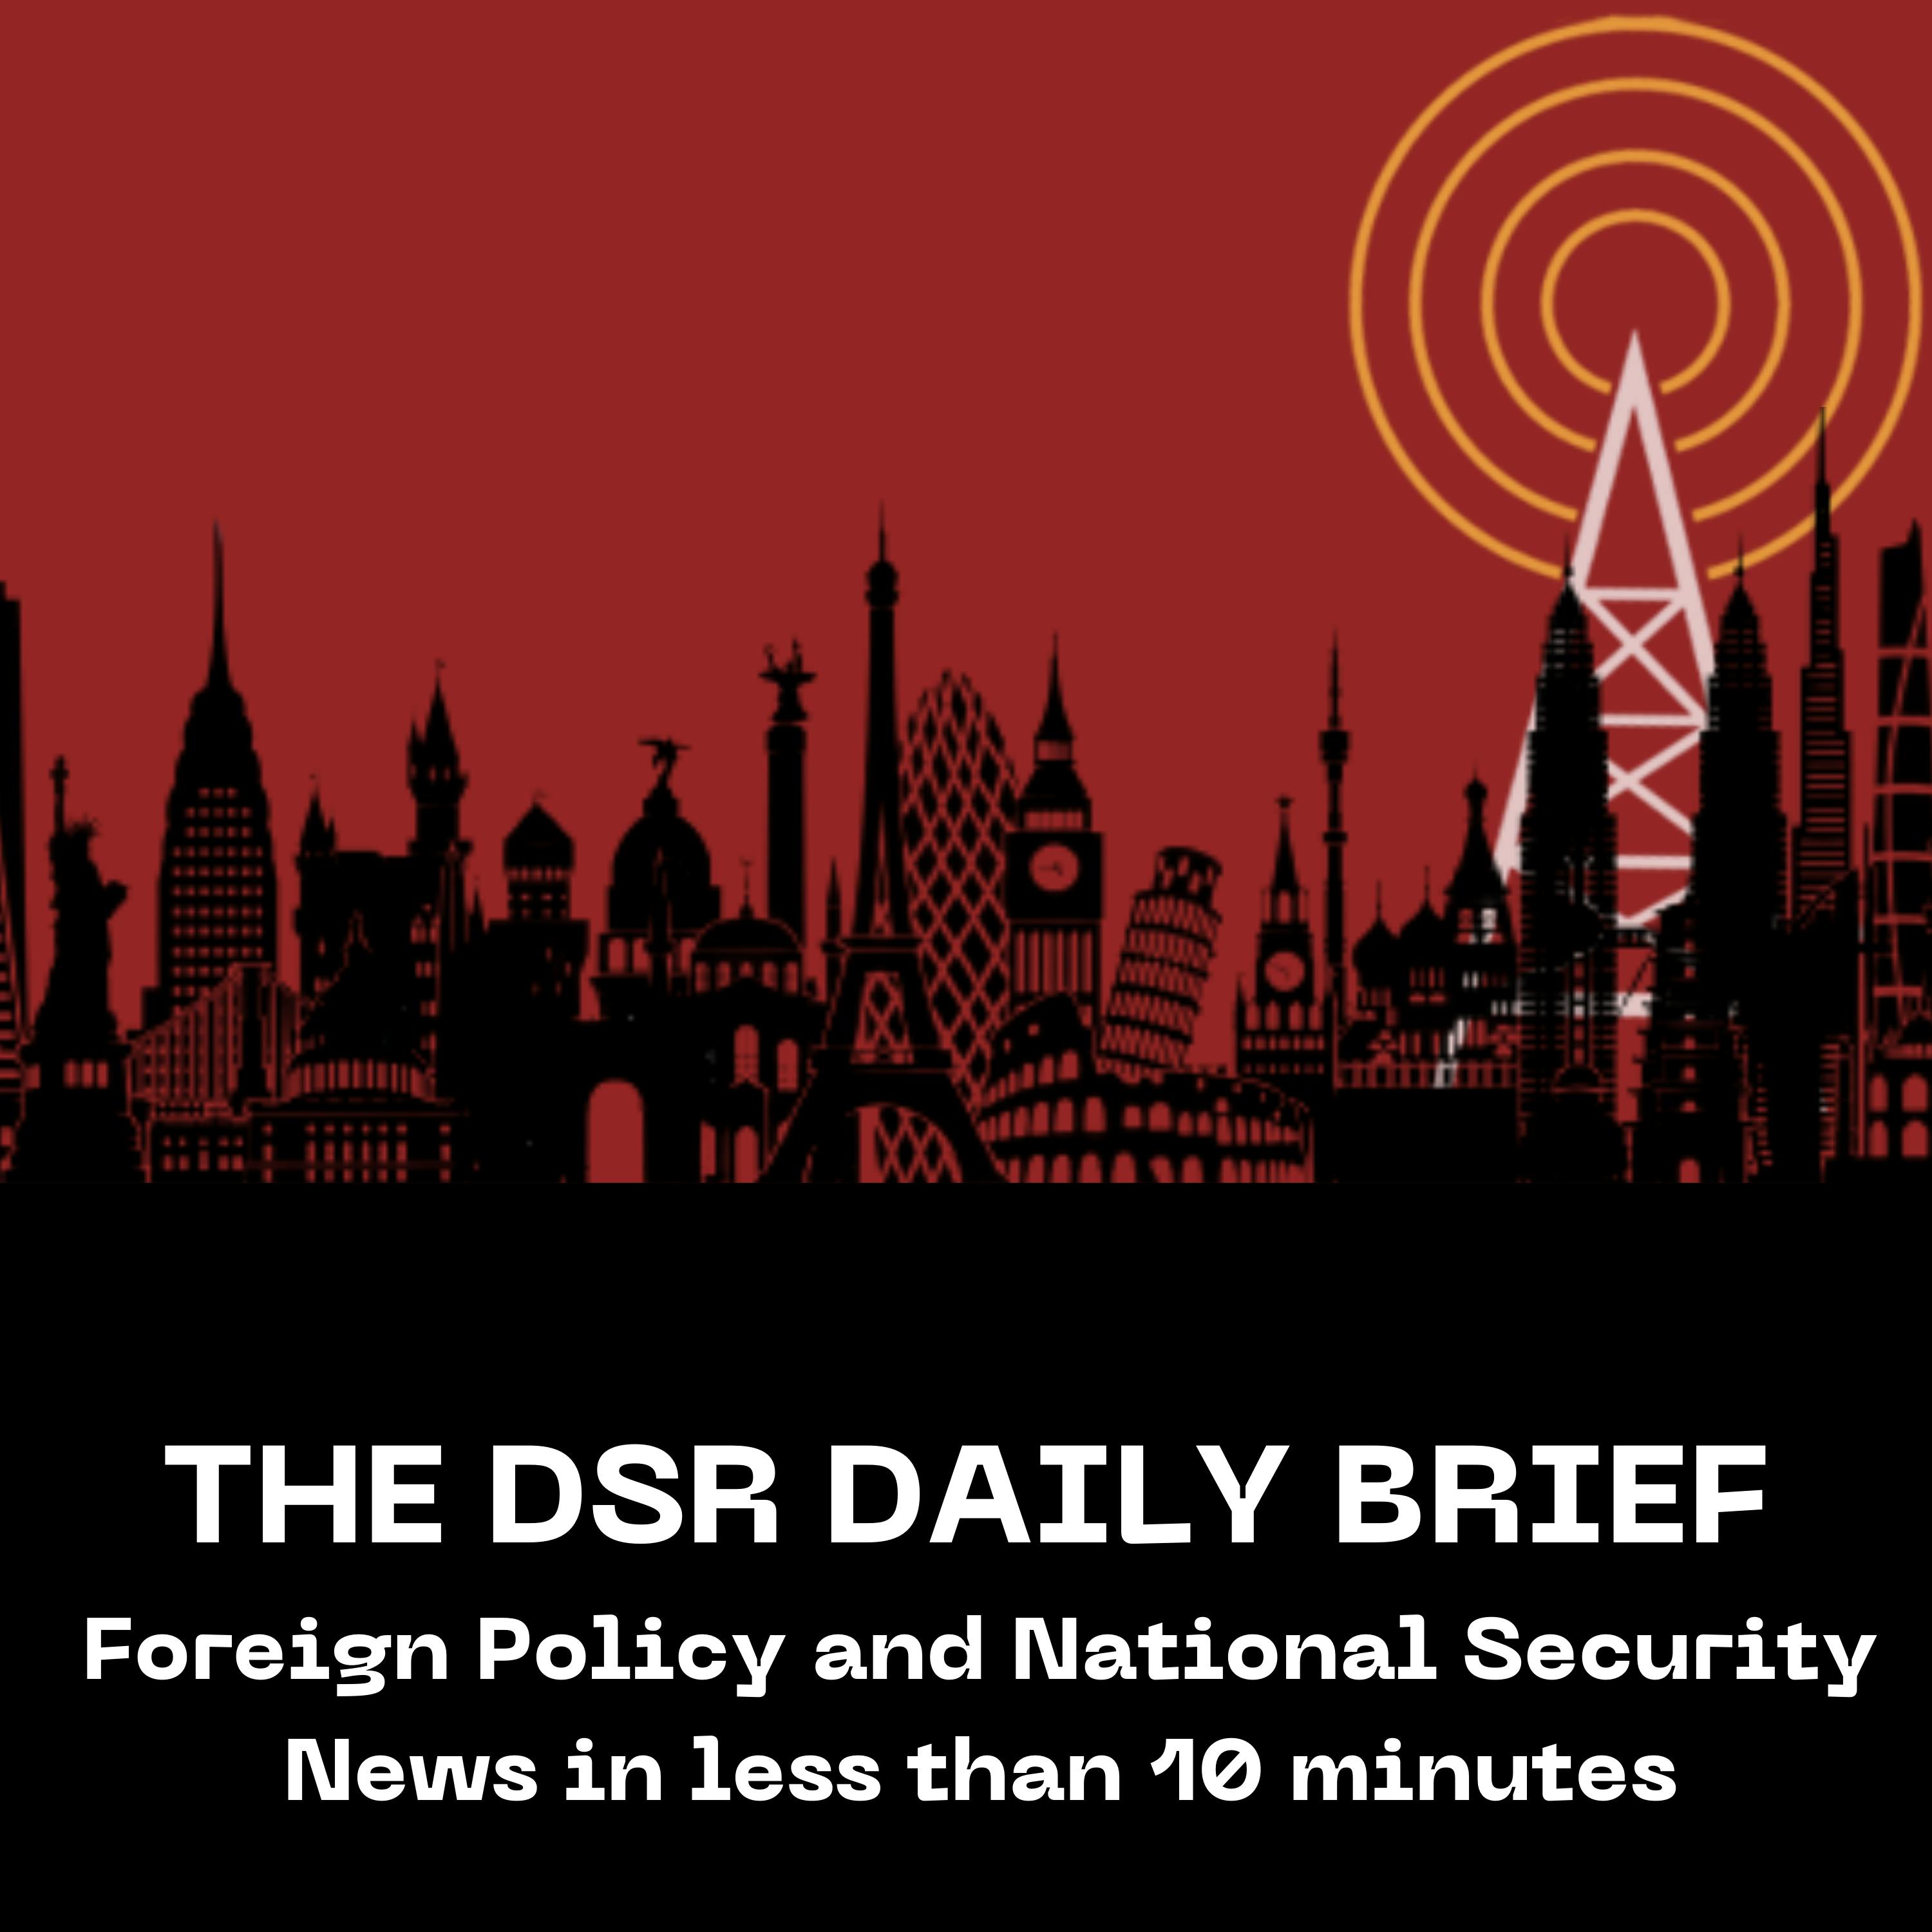 The DSR Daily for May 24: China Stages Mock Strikes, US Announces New Ukraine Aid